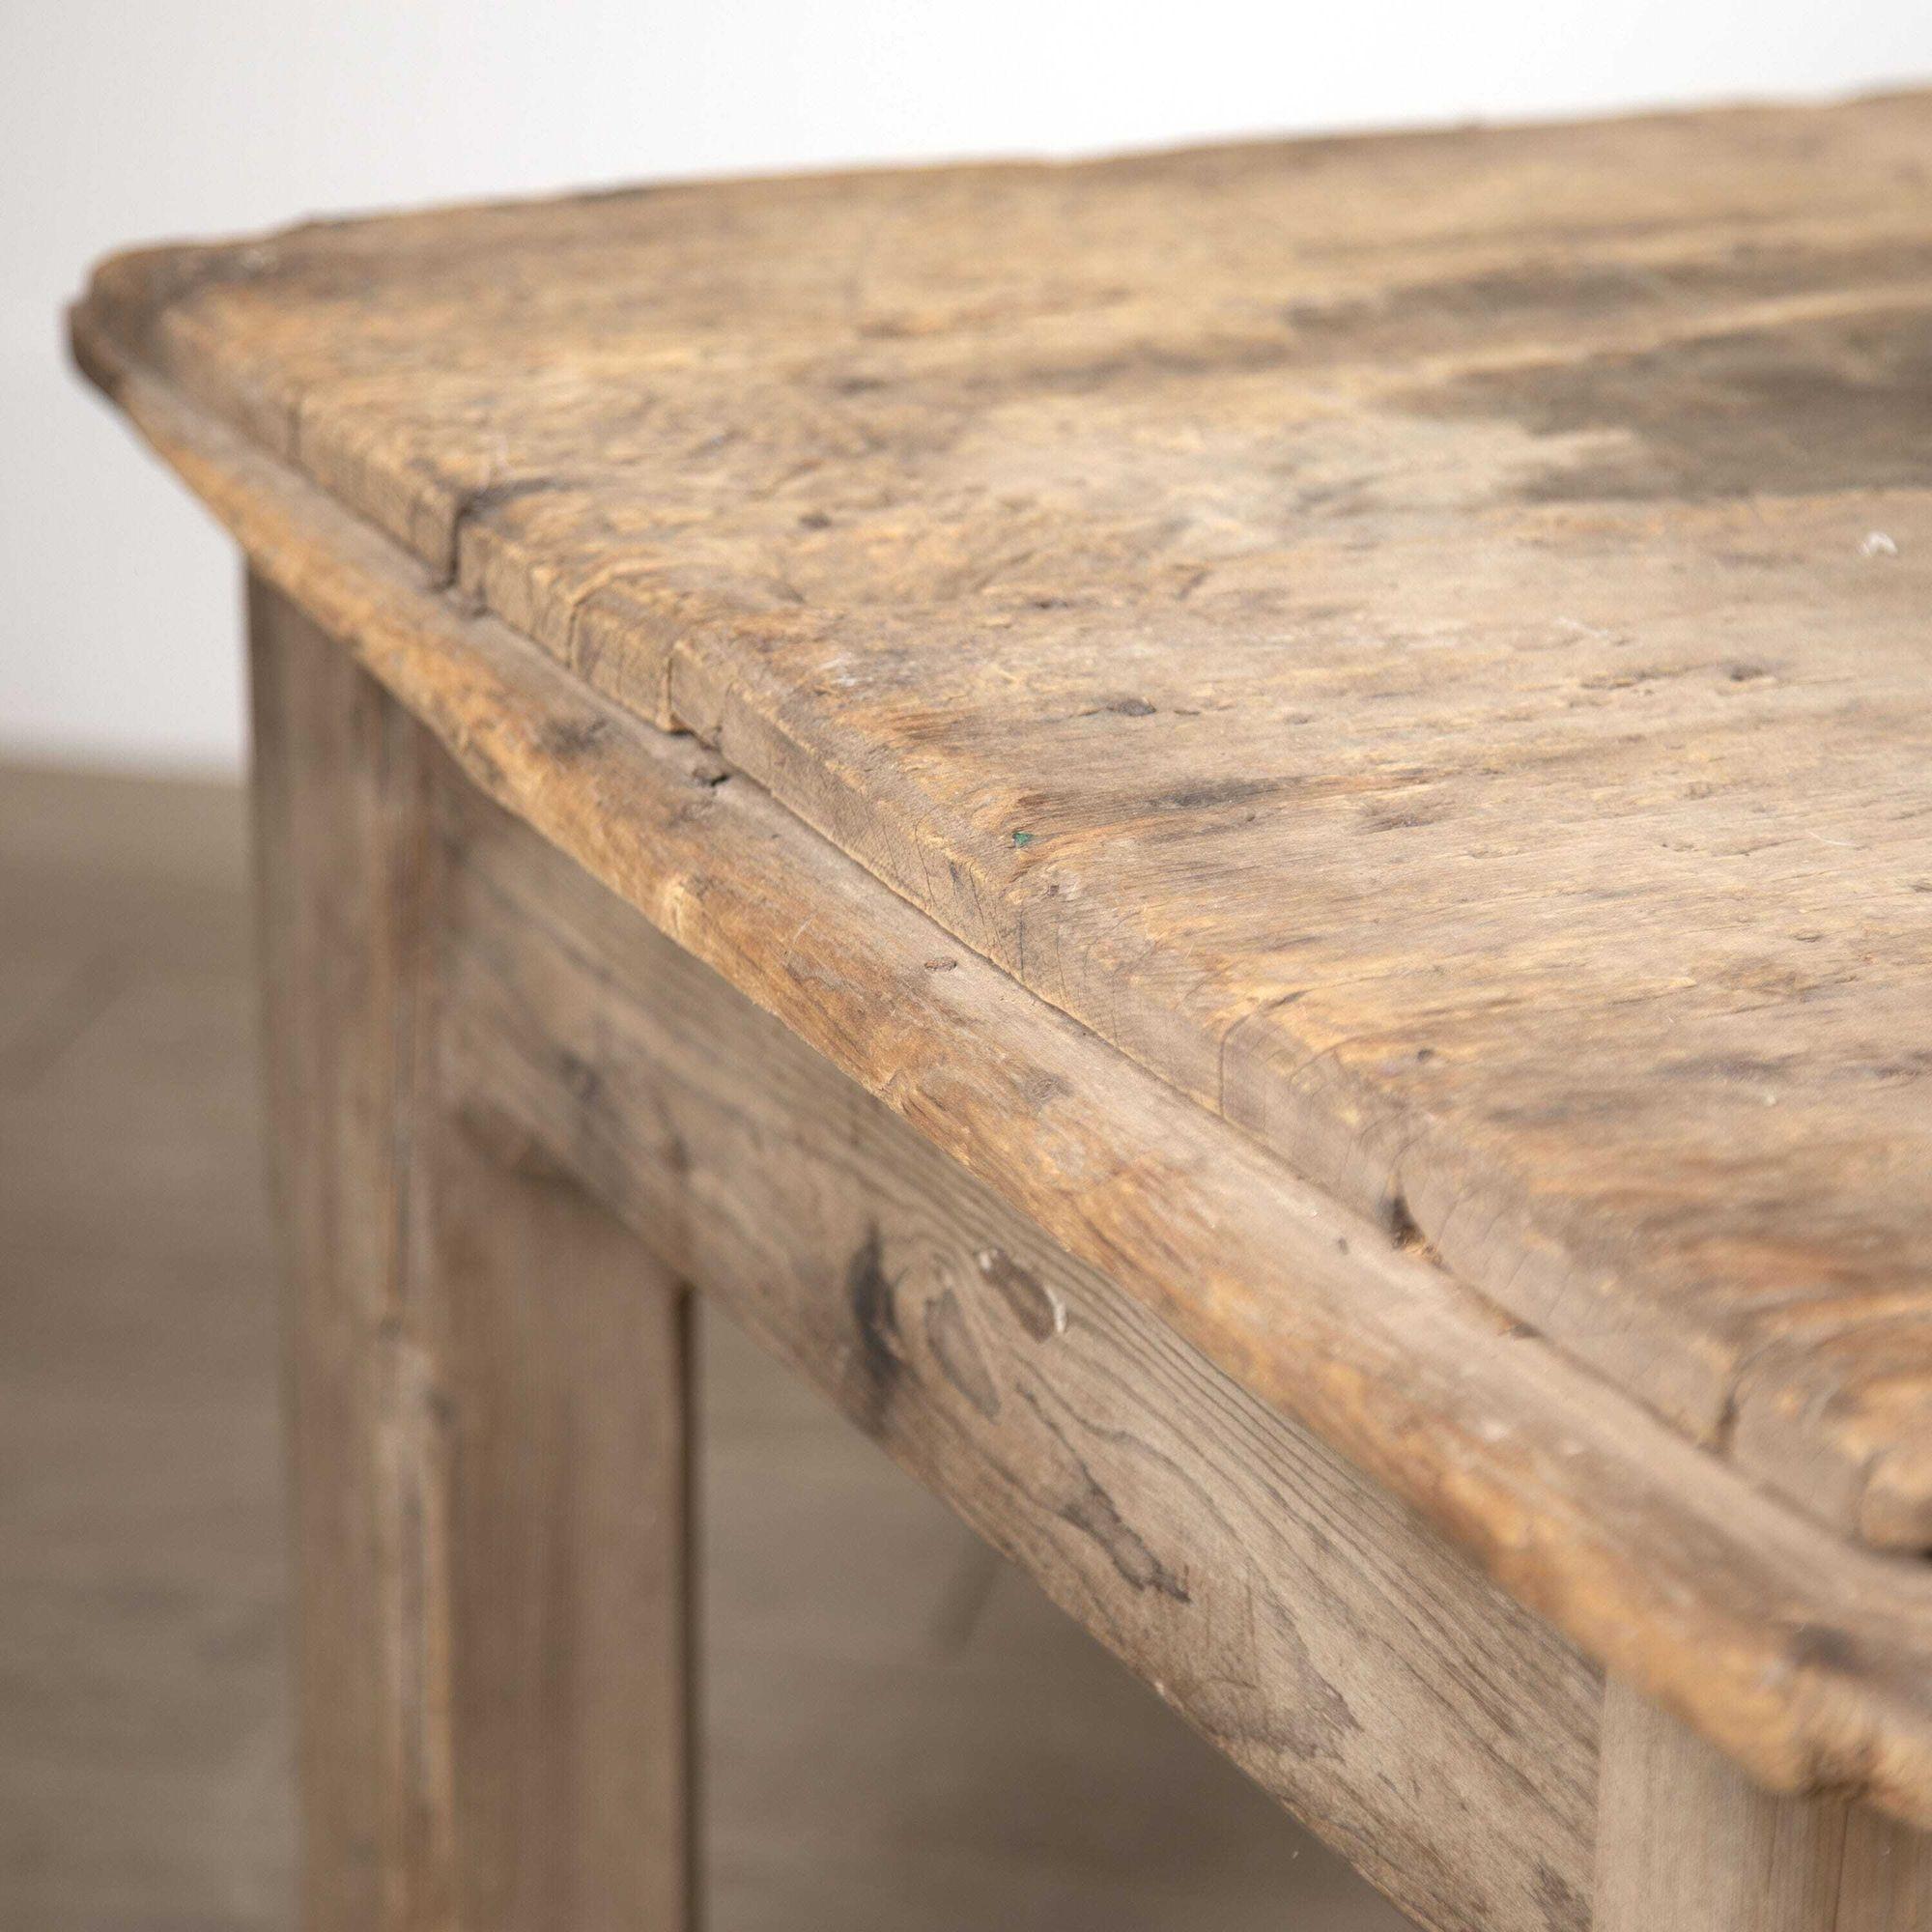 Wonderful 19th century rustic dining table.
This rustic country dining table is full of character with its unusual decoration of adult Graffiti carved into the top.
This table has certainly lived a life and would now make a fantastic dining table,